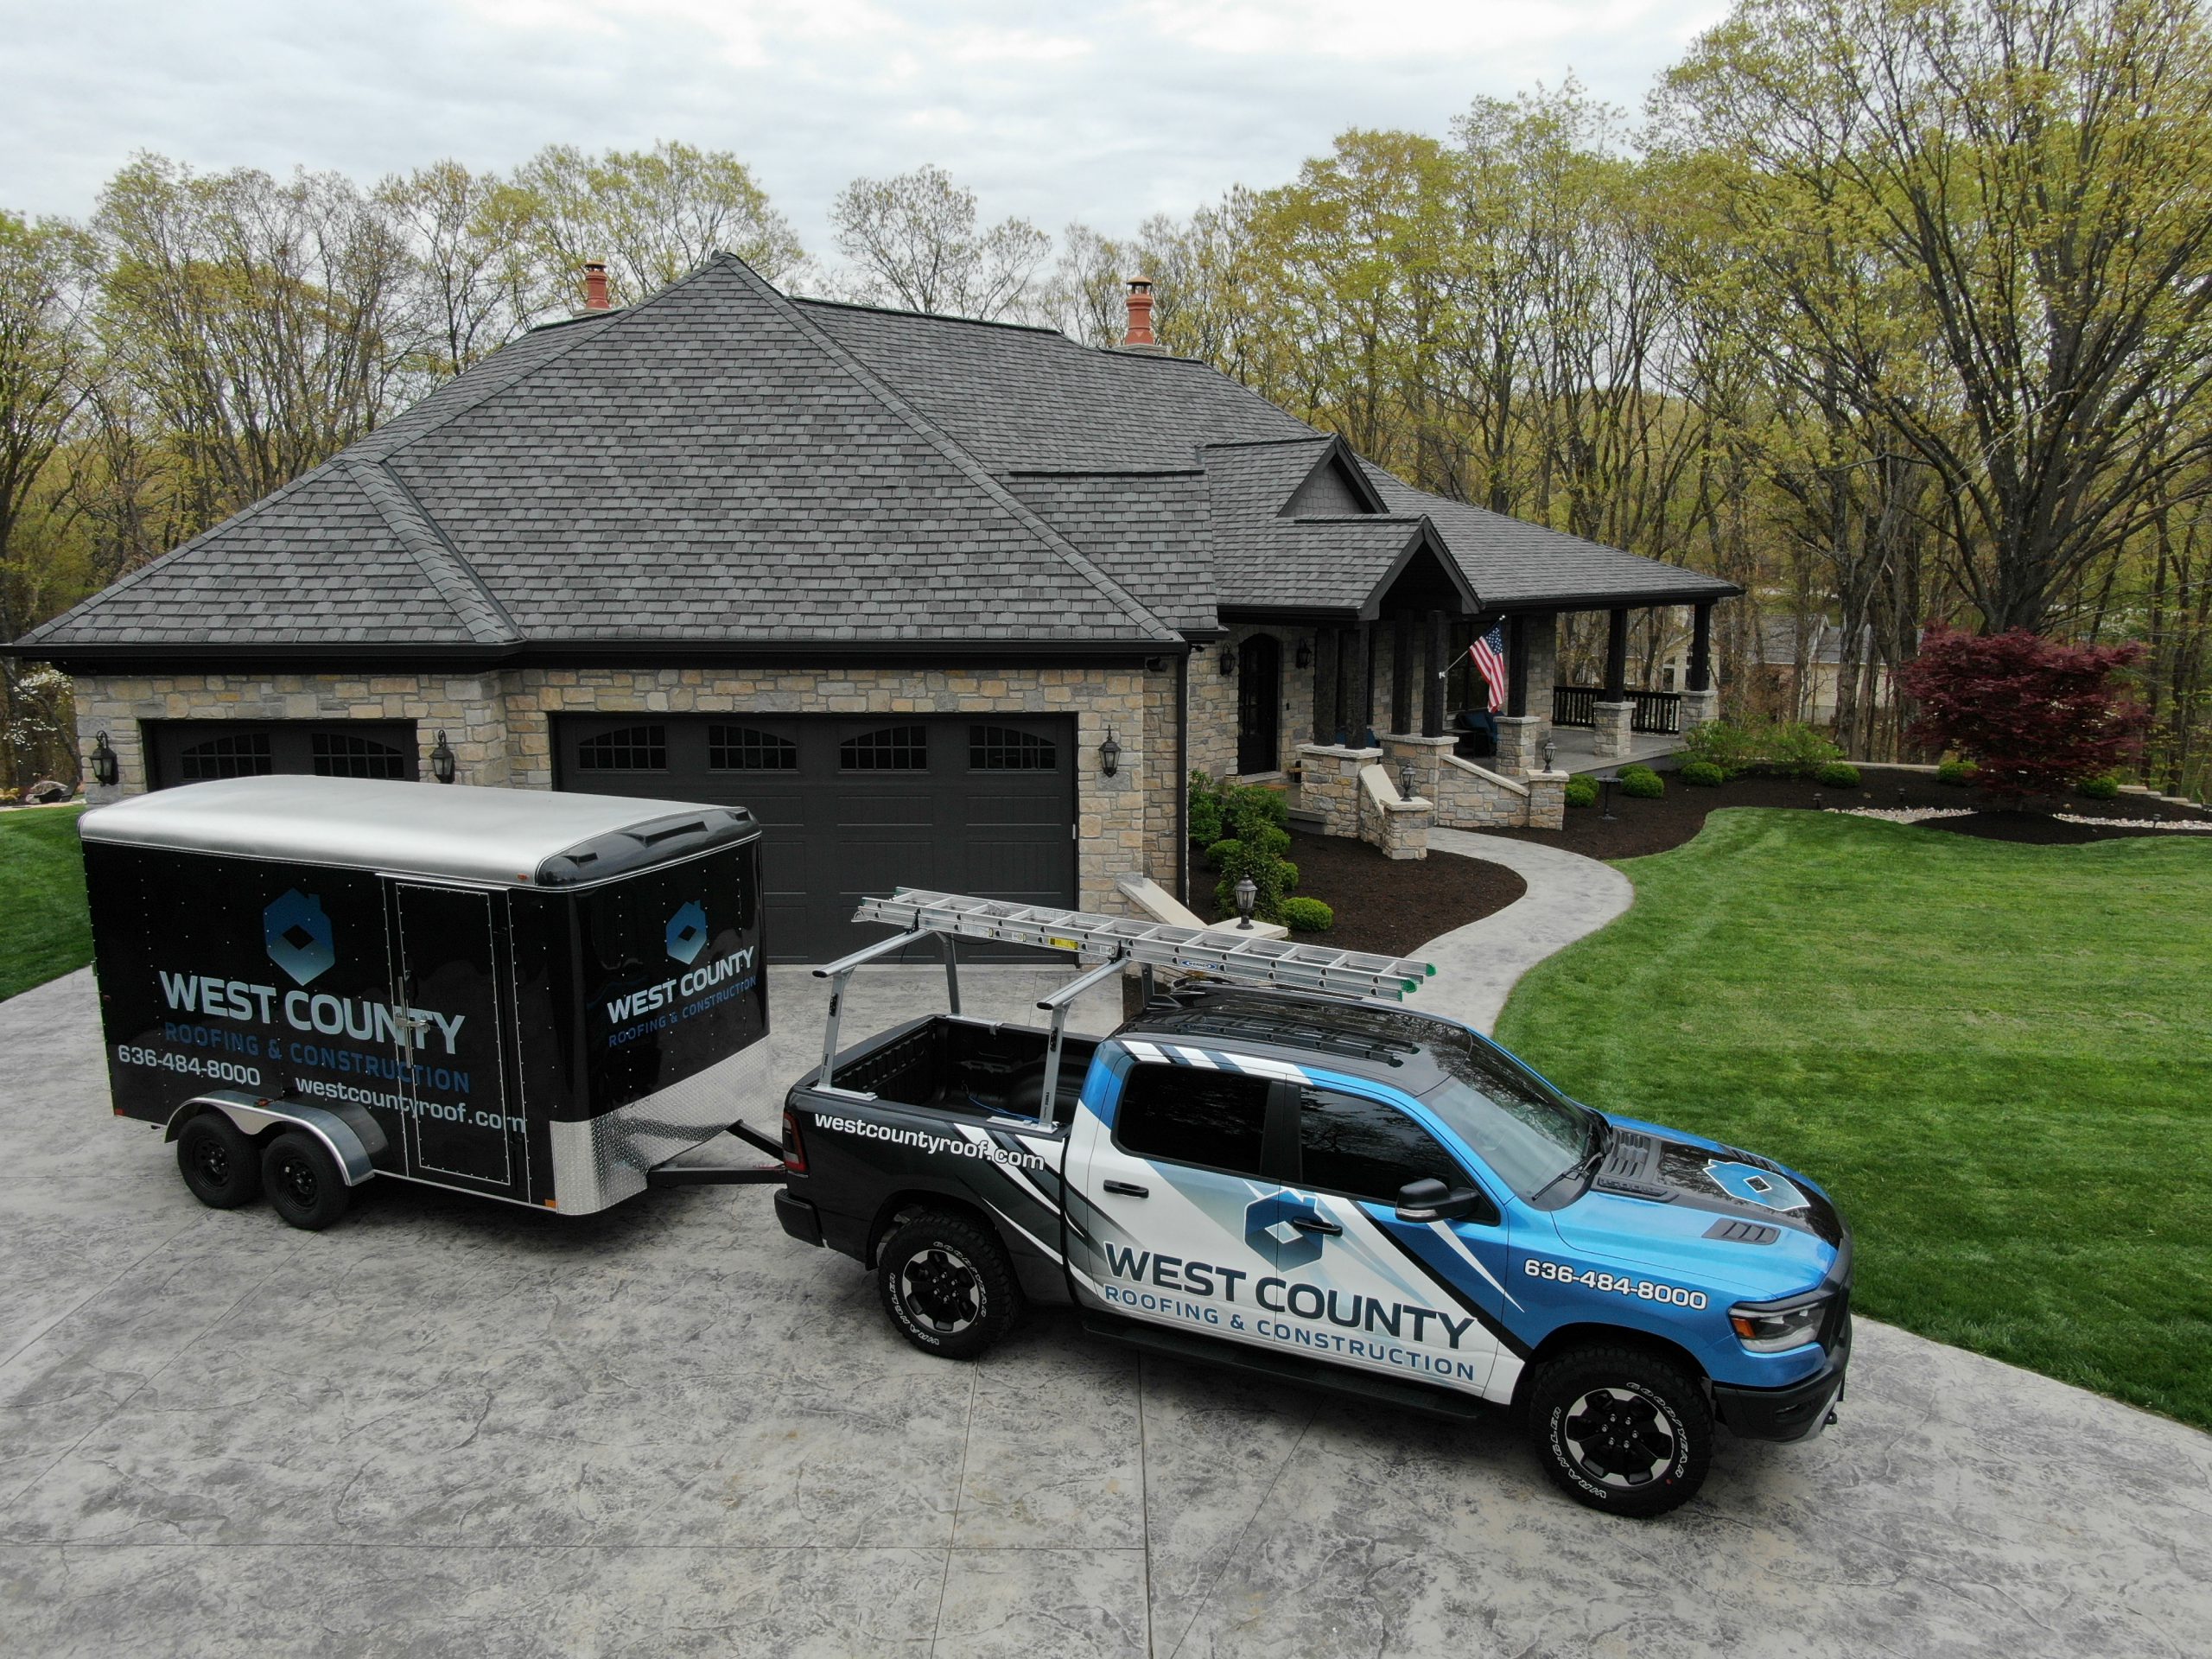 West County Roofing & Construction Serving St. Louis, Wildwood, Ballwin, Ellisville, Ladue, Town & Country and Montenac Missouri